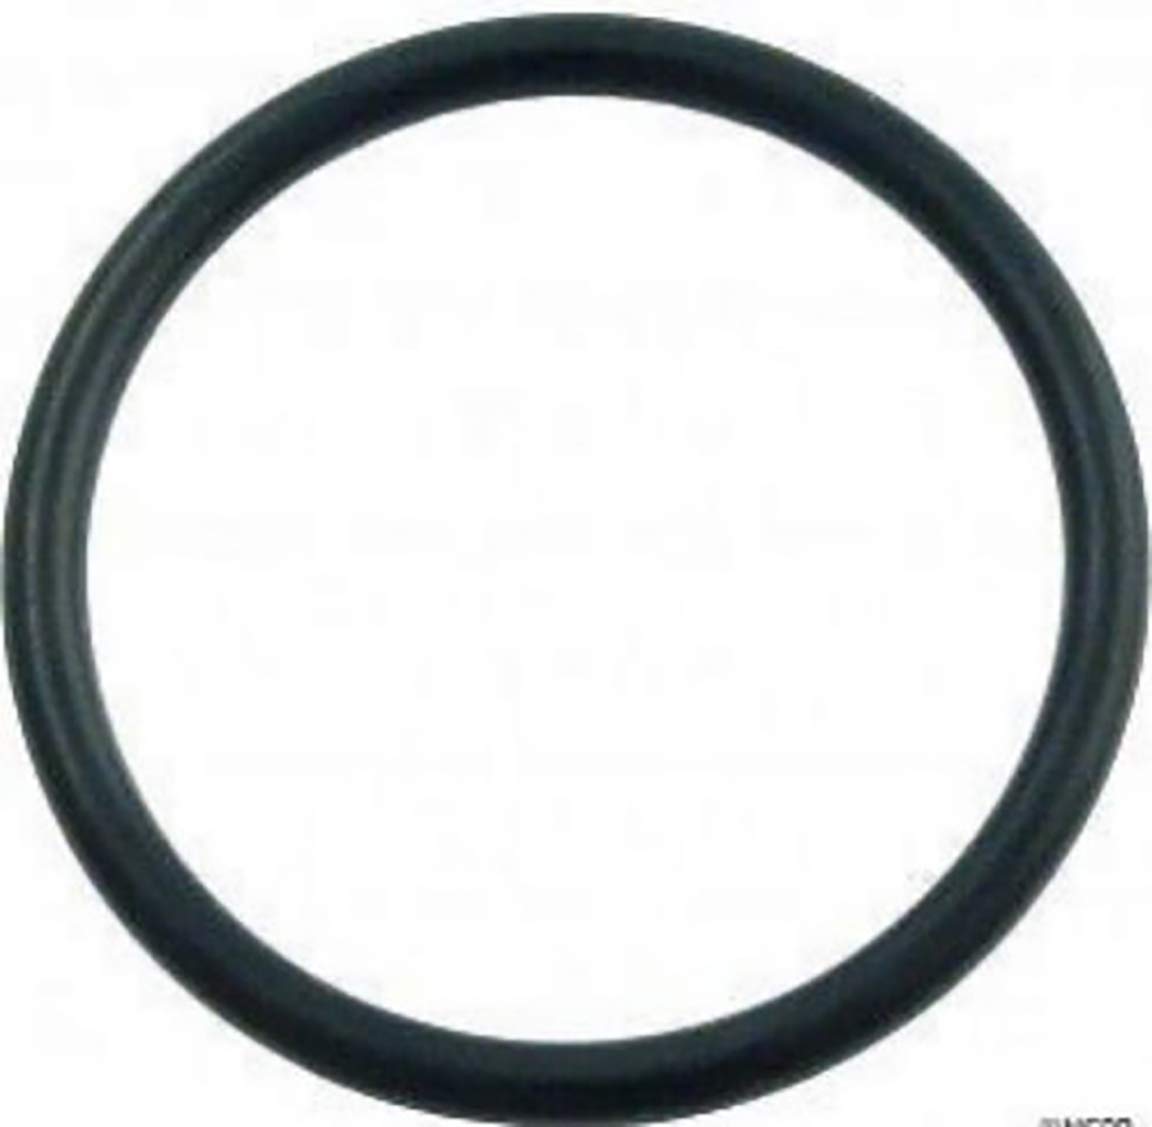 Generic O-Ring Depot Fits and Compatible with Whirlpool, Sears, GE, North Star 7170246 O-Ring